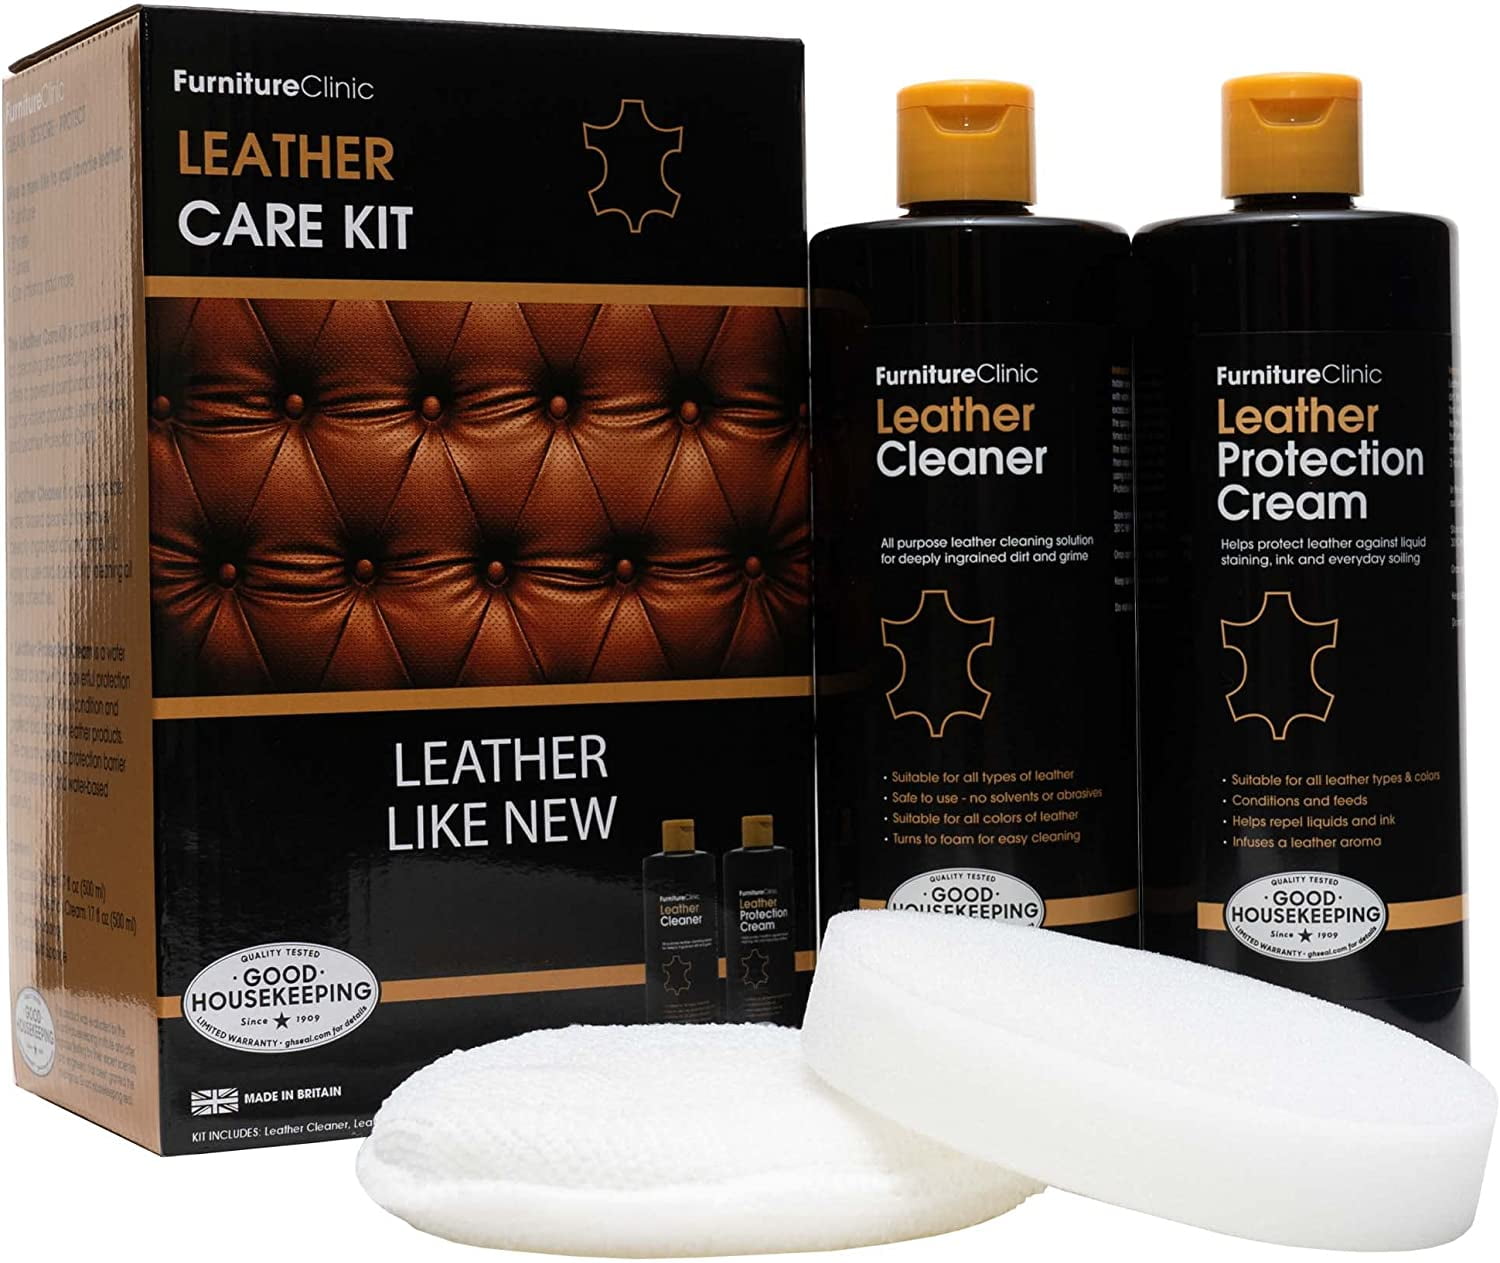 Furniture Clinic The Original Leather Recoloring Balm 16 Color Options -  Leather Repair Kit for Furniture - Restore Couches, Car Seats, Clothing 